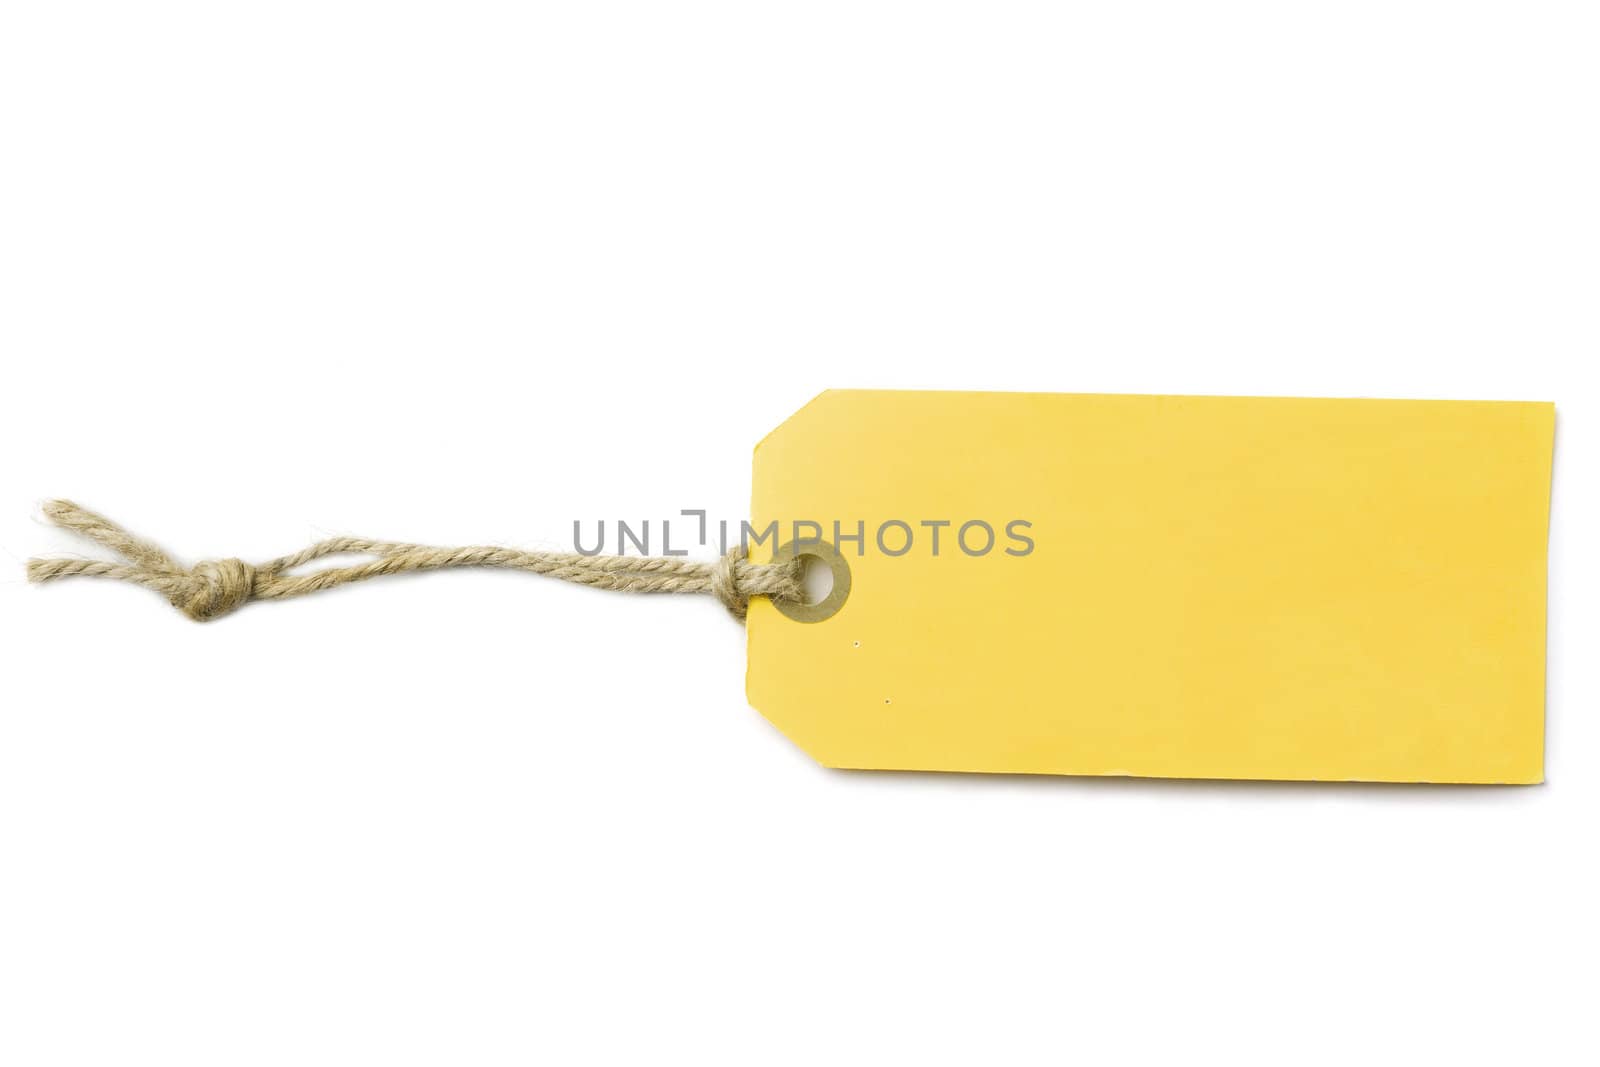 Blank yellow postal tag label isolated on white background